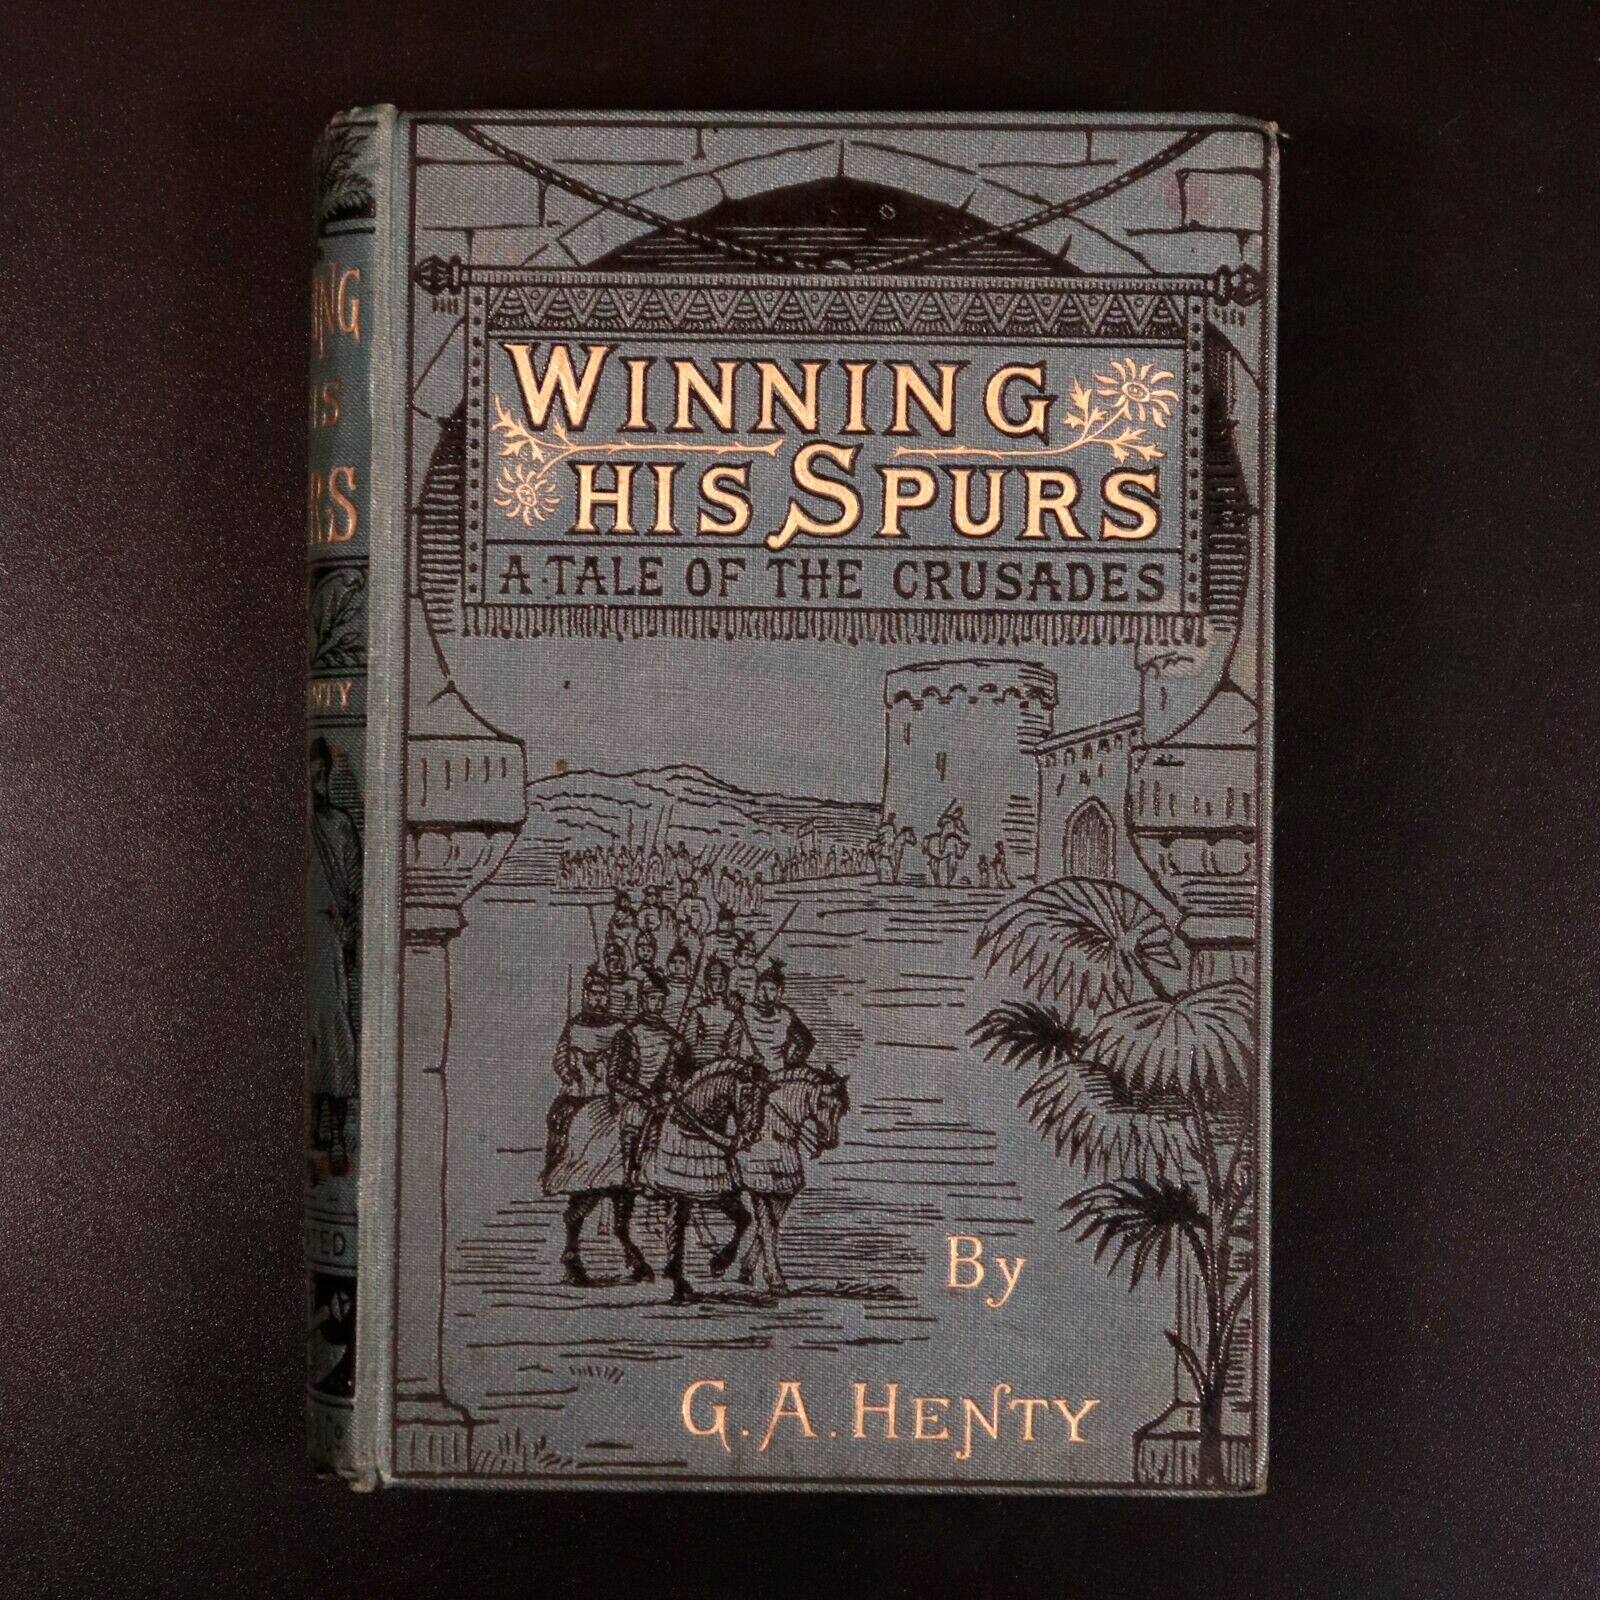 1891 Winning His Spurs Tale Of Crusades GA Henty Antique Historical Fiction Book